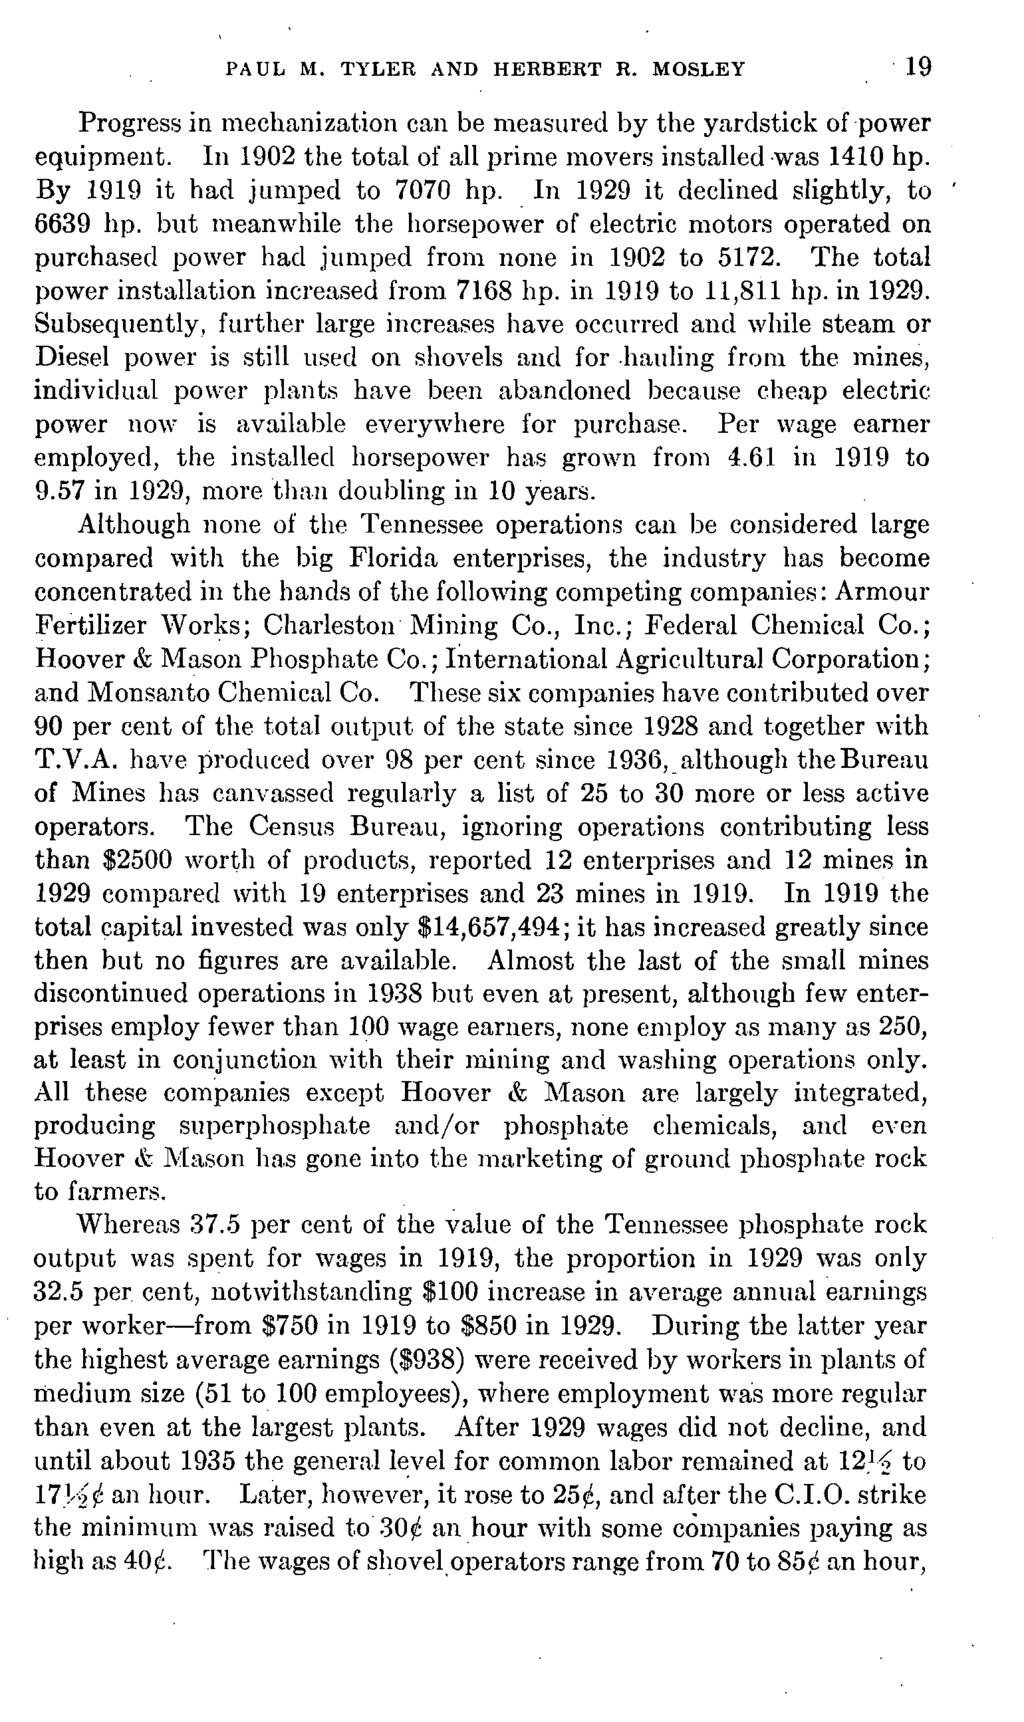 PAUL M. TYLER AND HERBERT R. MOSLEY 19 Progress in mechai~izat~ion can be measurecl by the yardstick of power equipment. In 1902 the total of all prime Illovers iristalled.was 1410 hp.